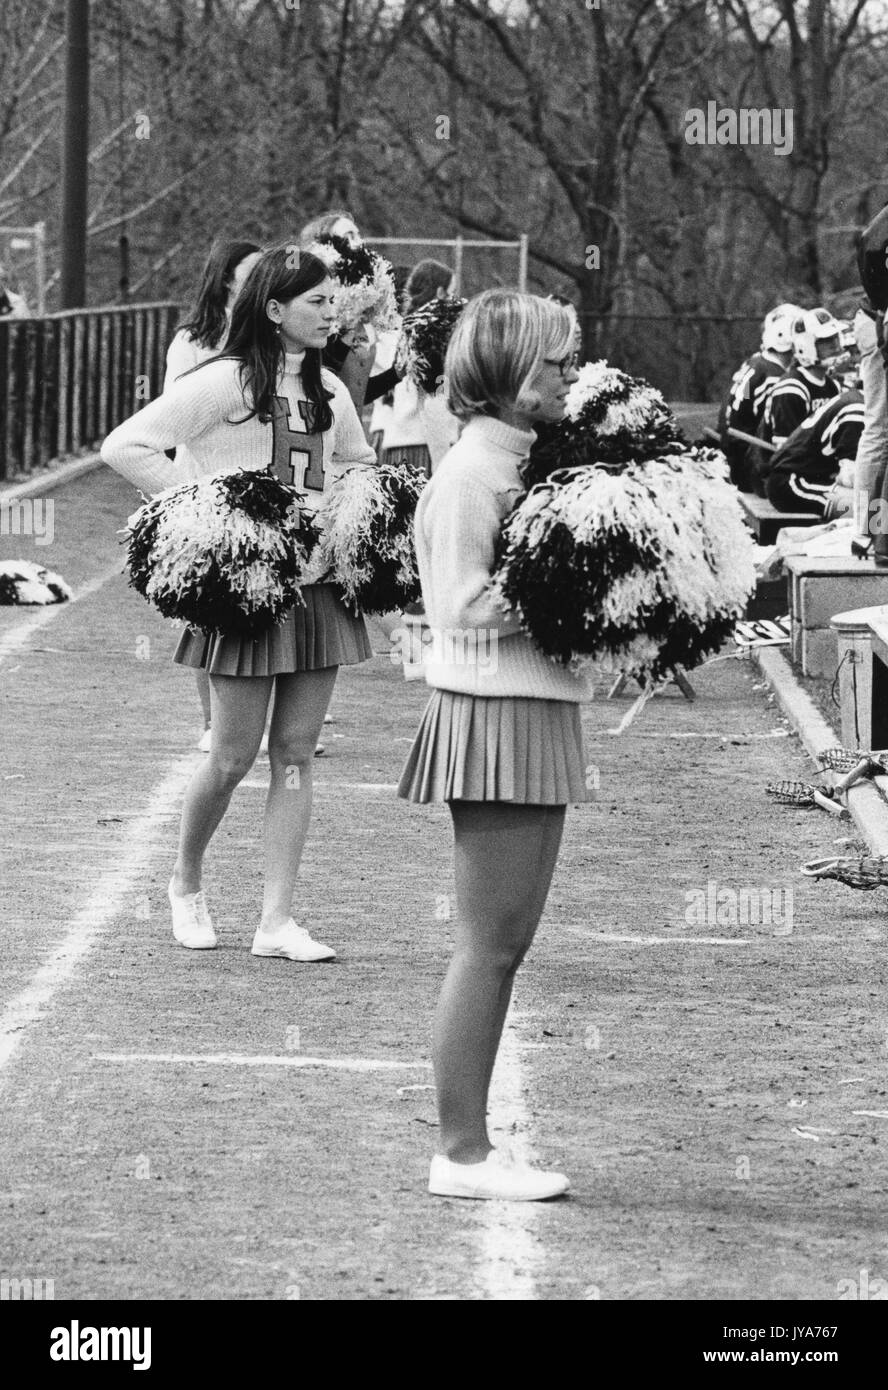 Female undergraduate students at Johns Hopkins University cheerlead during sporting event on the Homewood campus in Baltimore, Maryland during the first years that the university's undergraduate program admitted women. 1970. Stock Photo